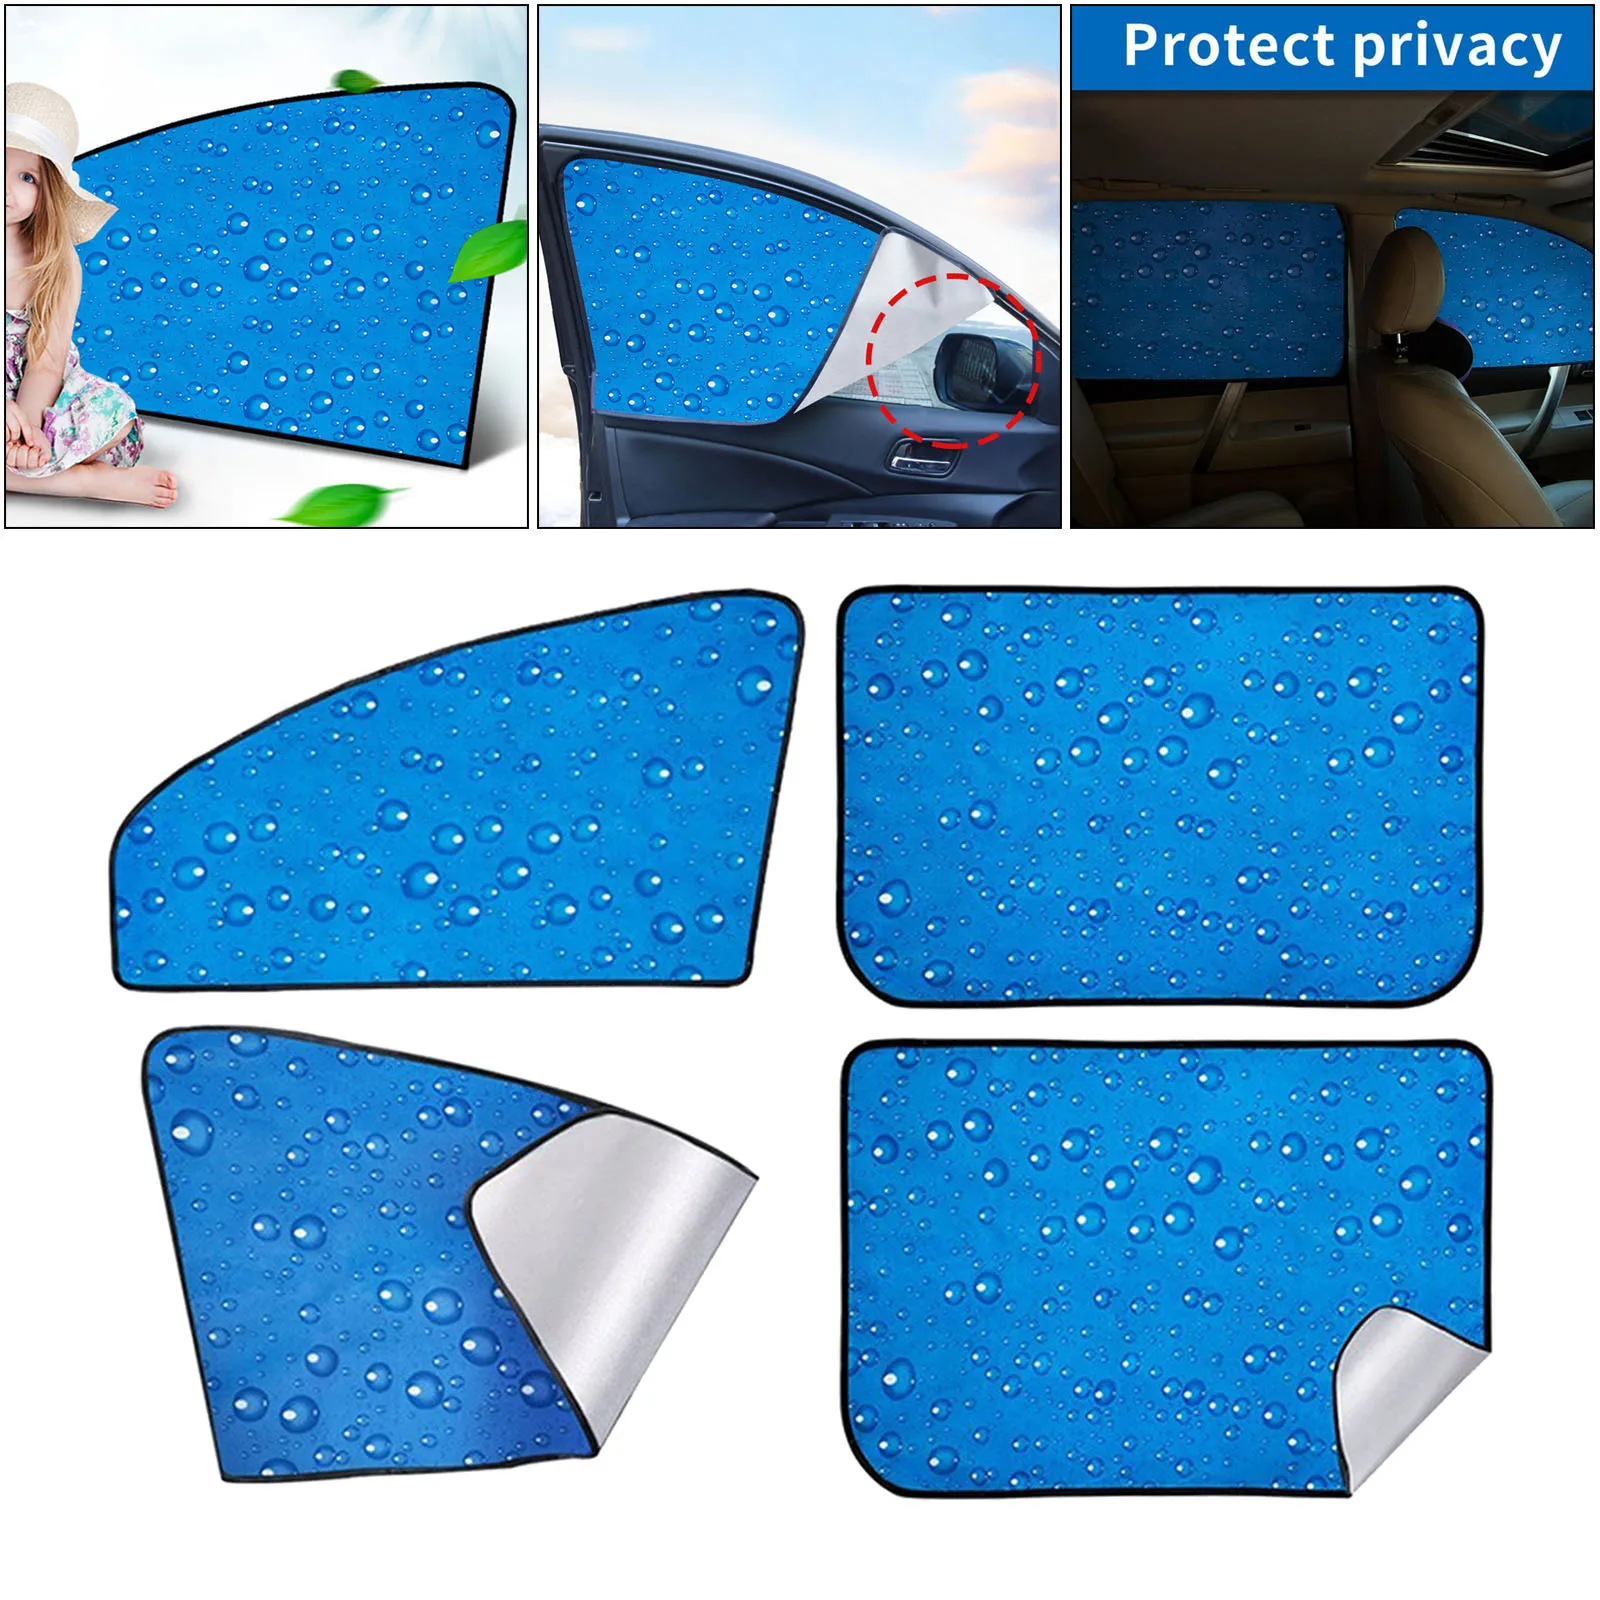 4-pack Car Magnetic Rear Front Side Window Sun Sunshade Kit, UV Protection, Durable Premium Material